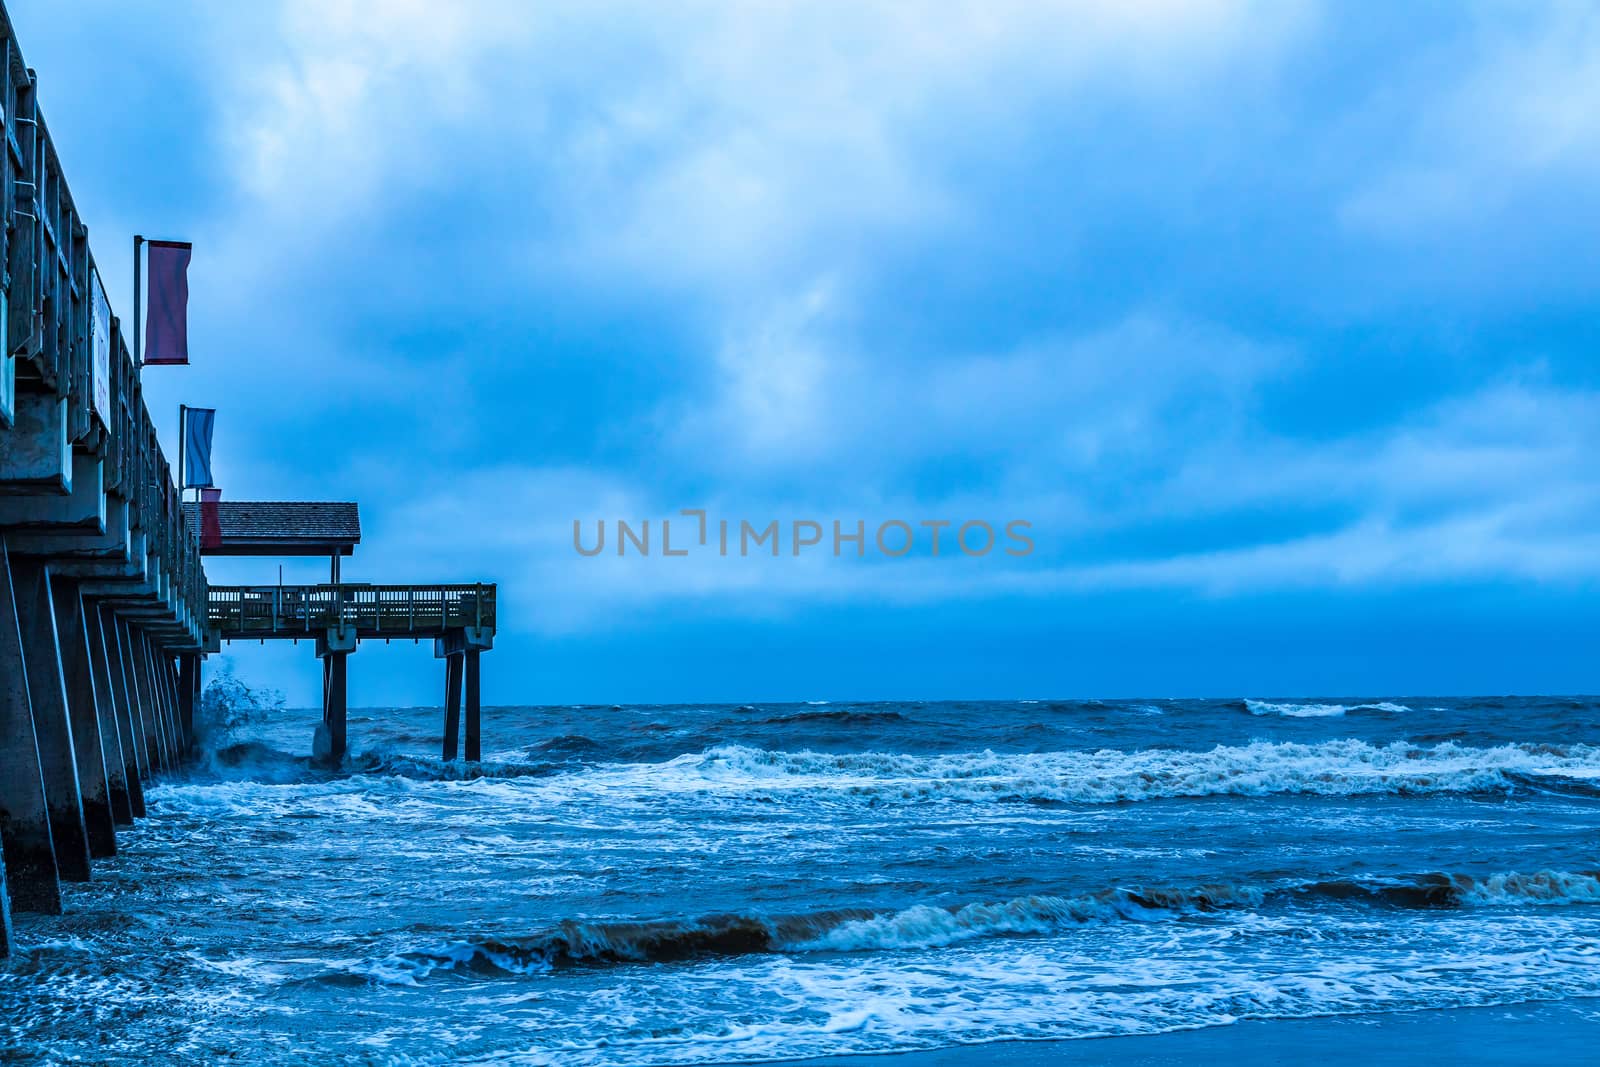 A stormy morning crashes ocean waves against the pier at Tybee Island, Georgia.